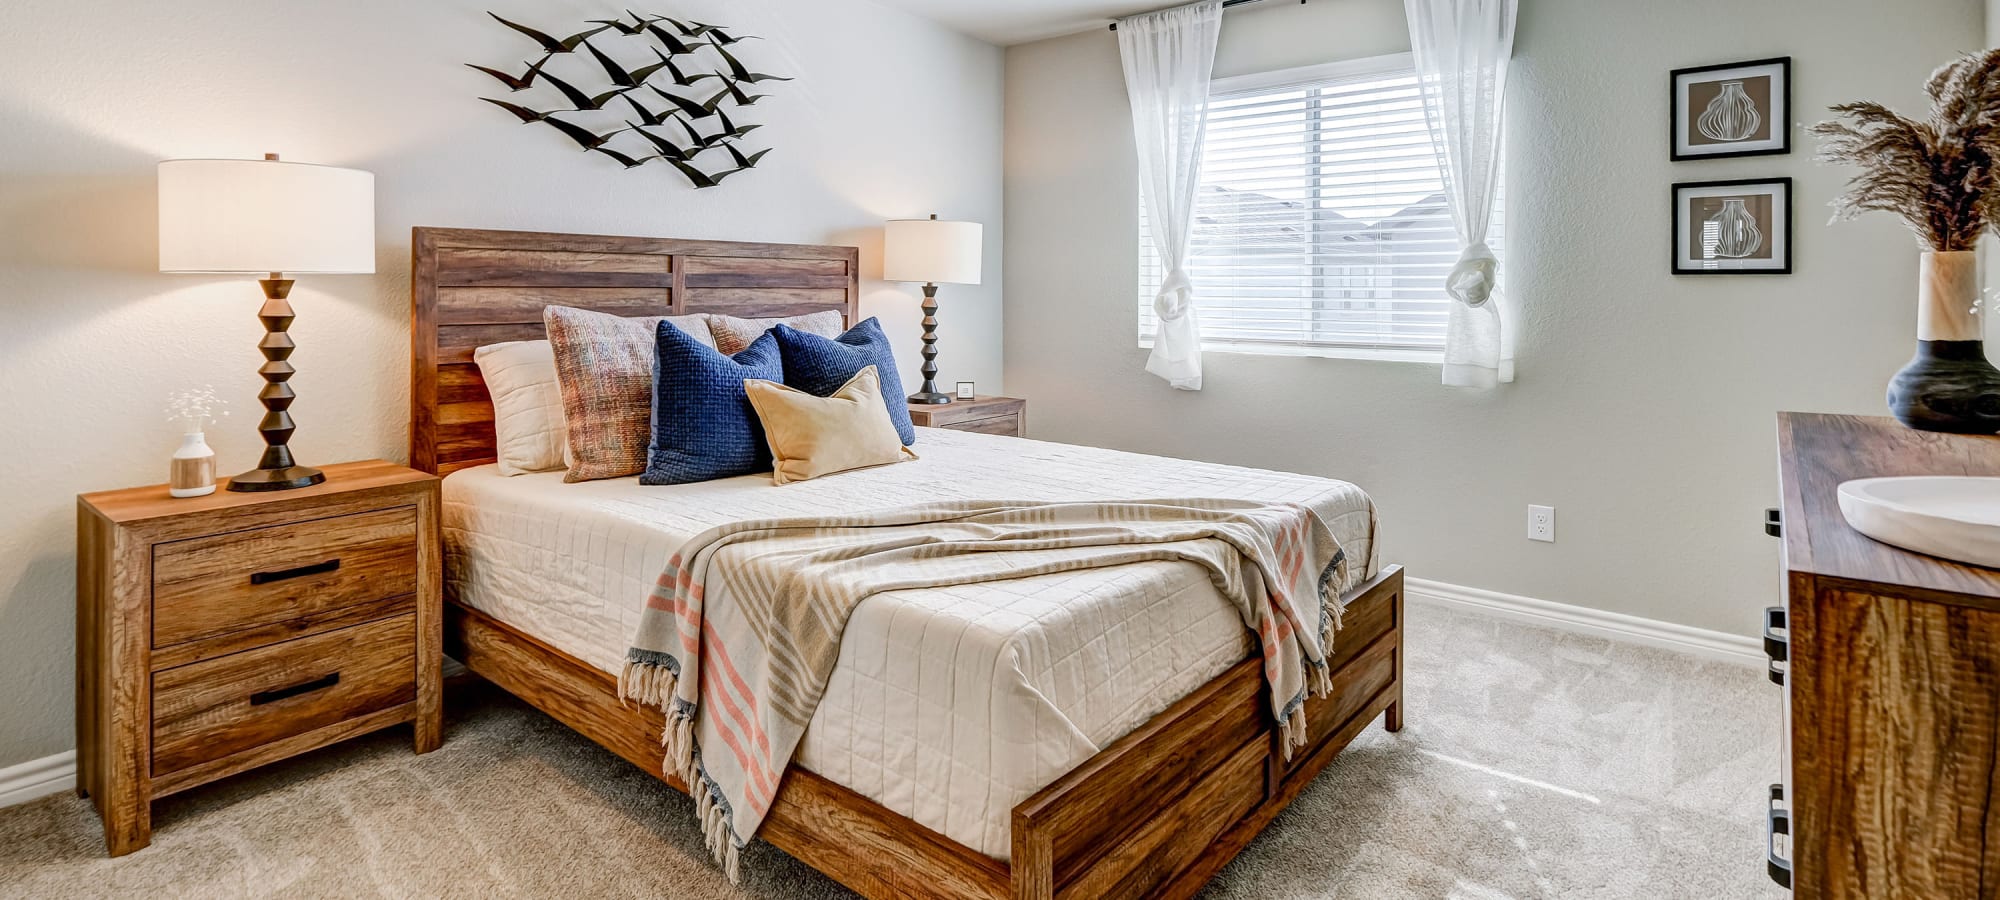 Bedroom at BB Living Civic Square in Goodyear, Arizona